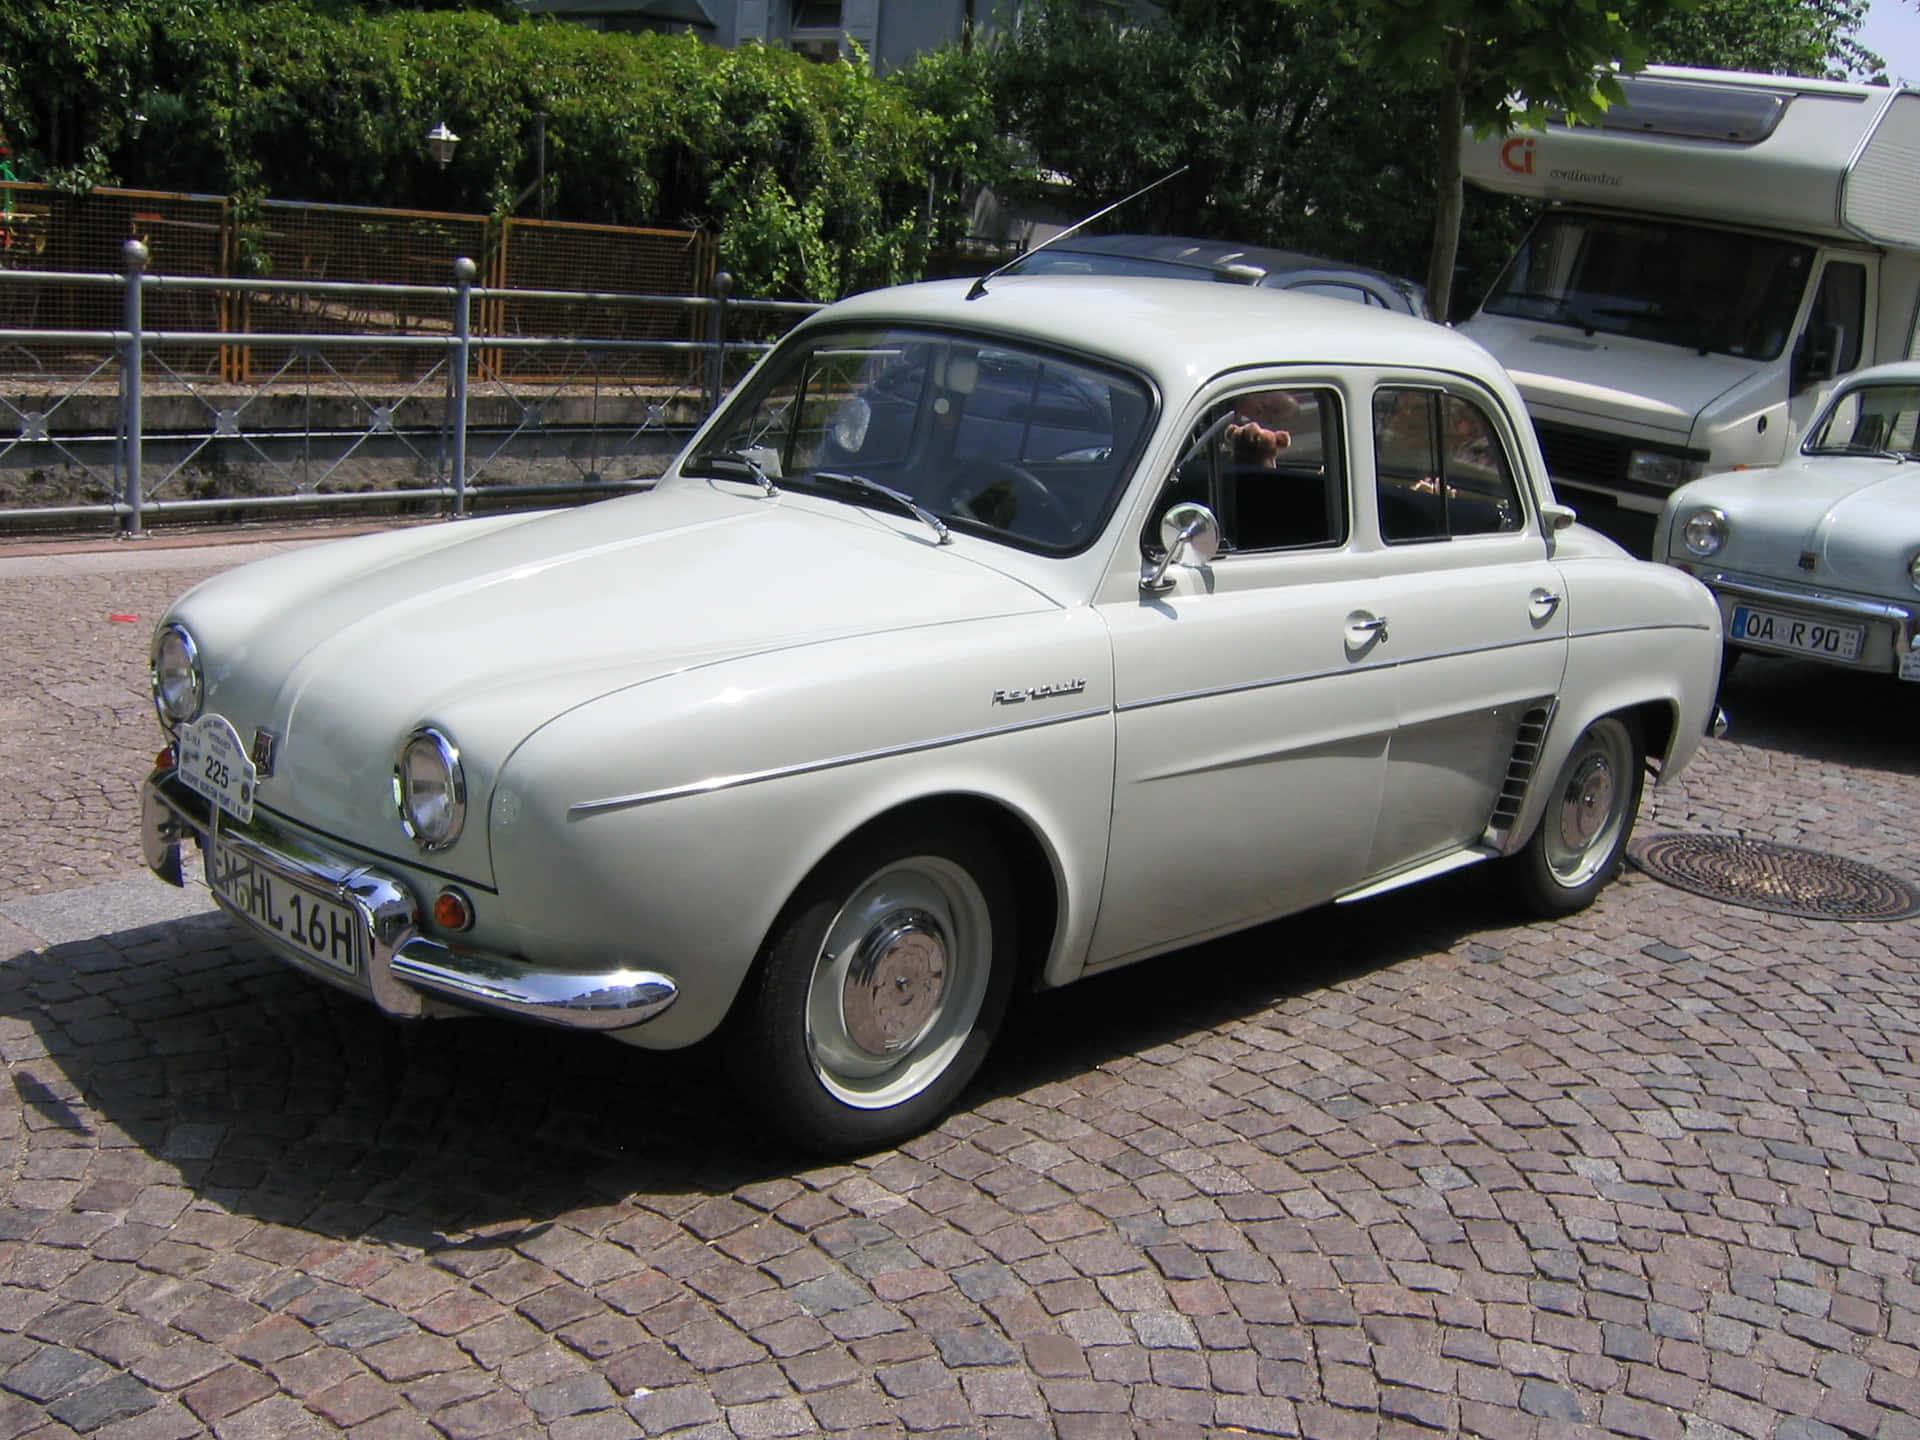 Caption: Iconic Renault Dauphine Riding In An Urban Landscape Wallpaper